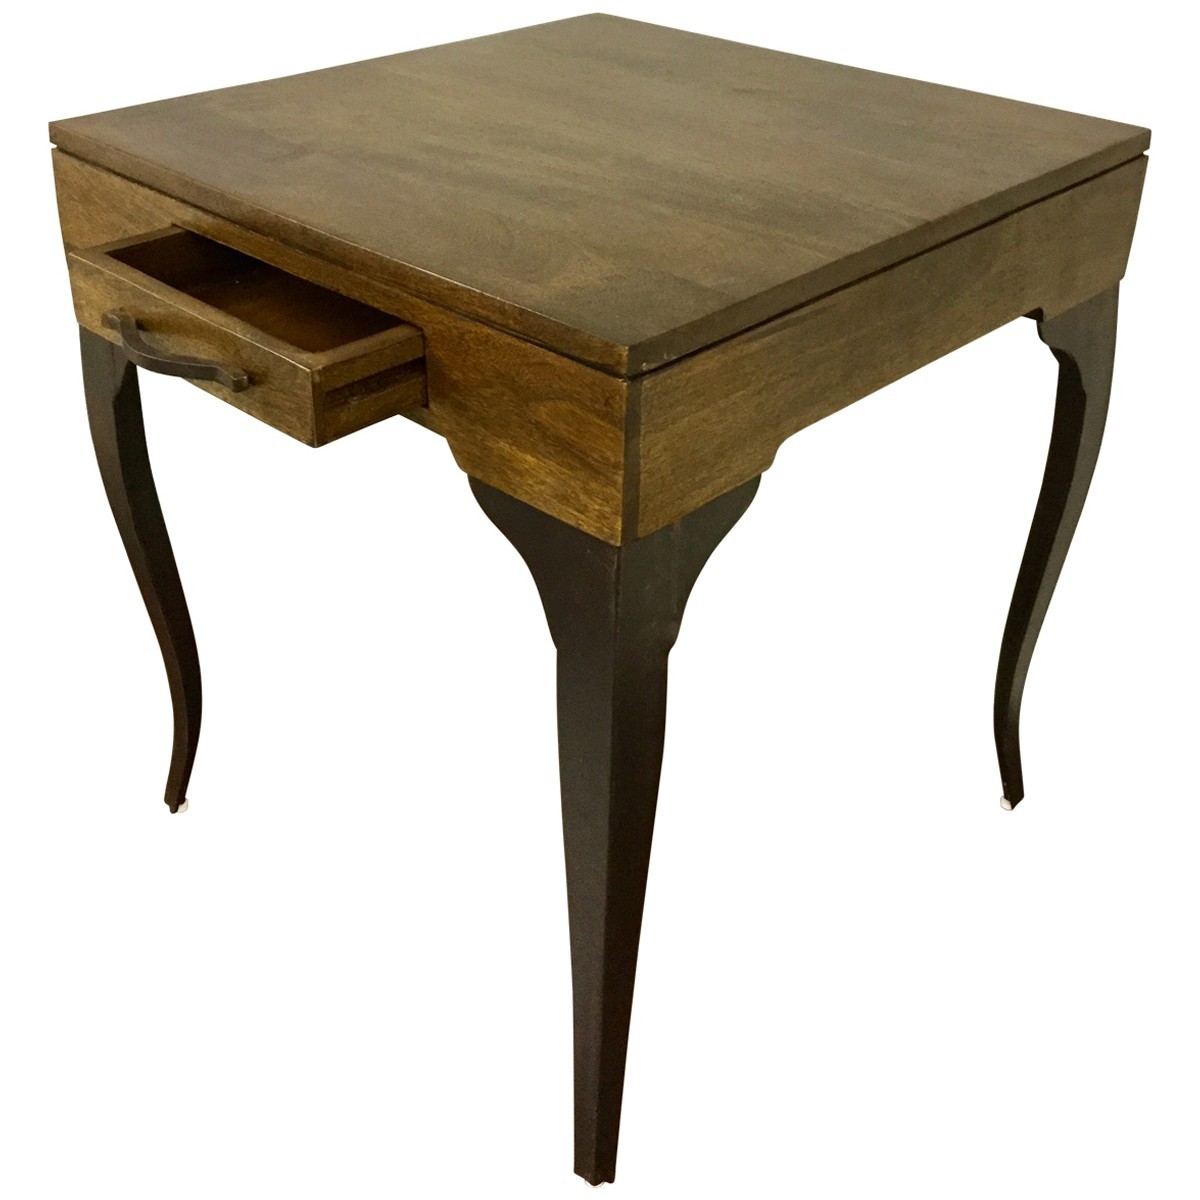 Melange Square Accent Side Table With Storage Drawer - Tables